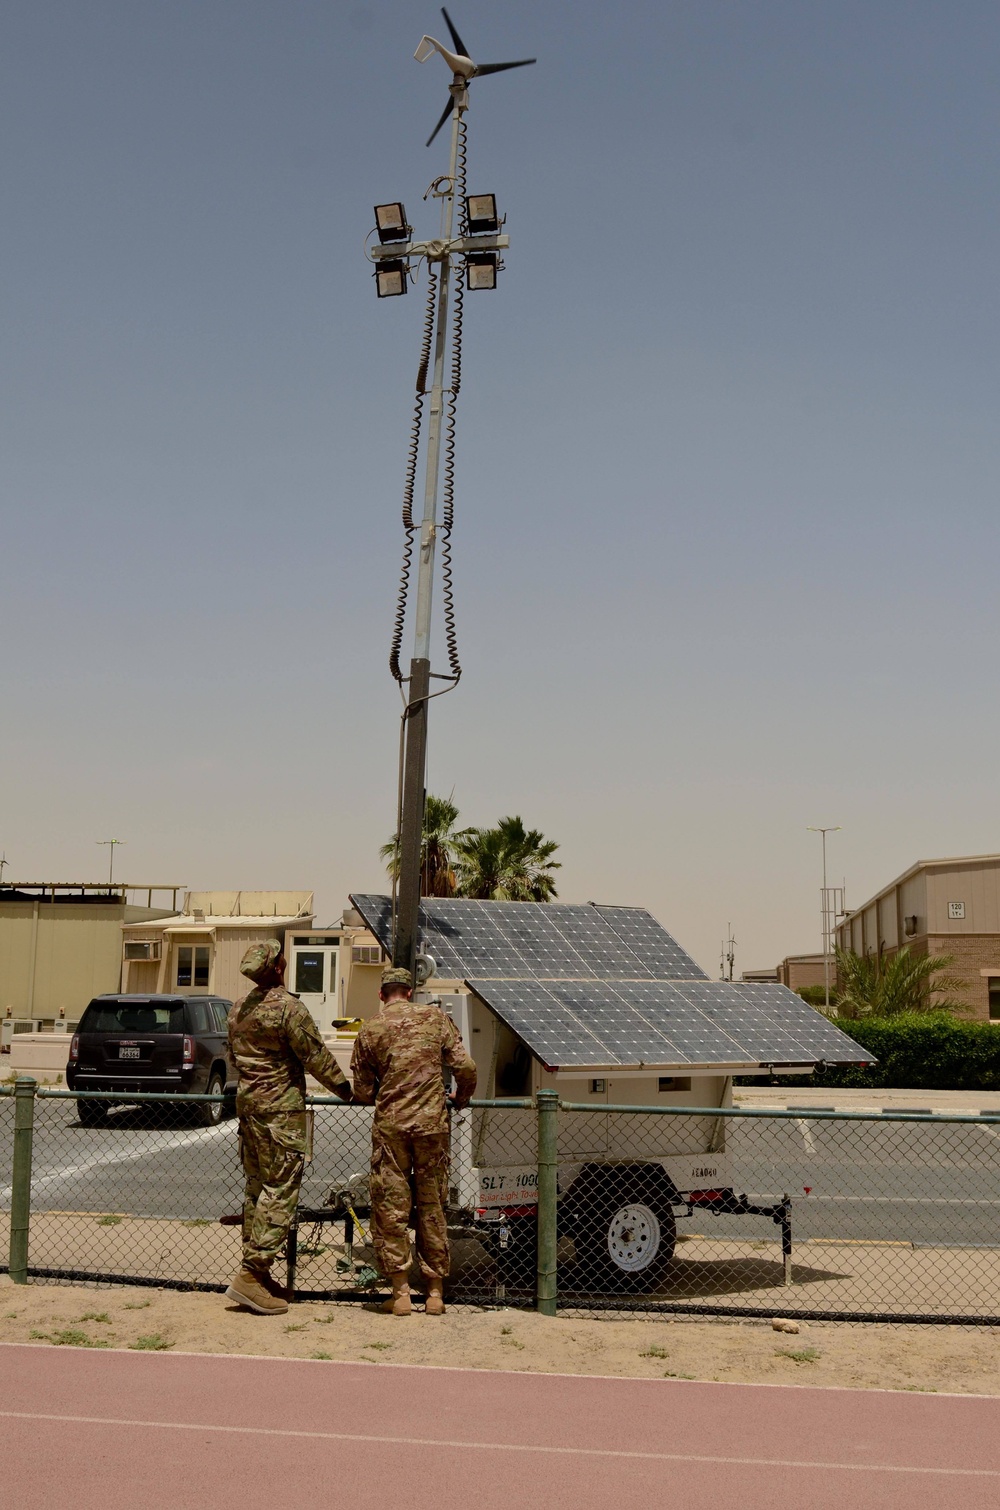 Solar lighting project moves forward at USARCENT